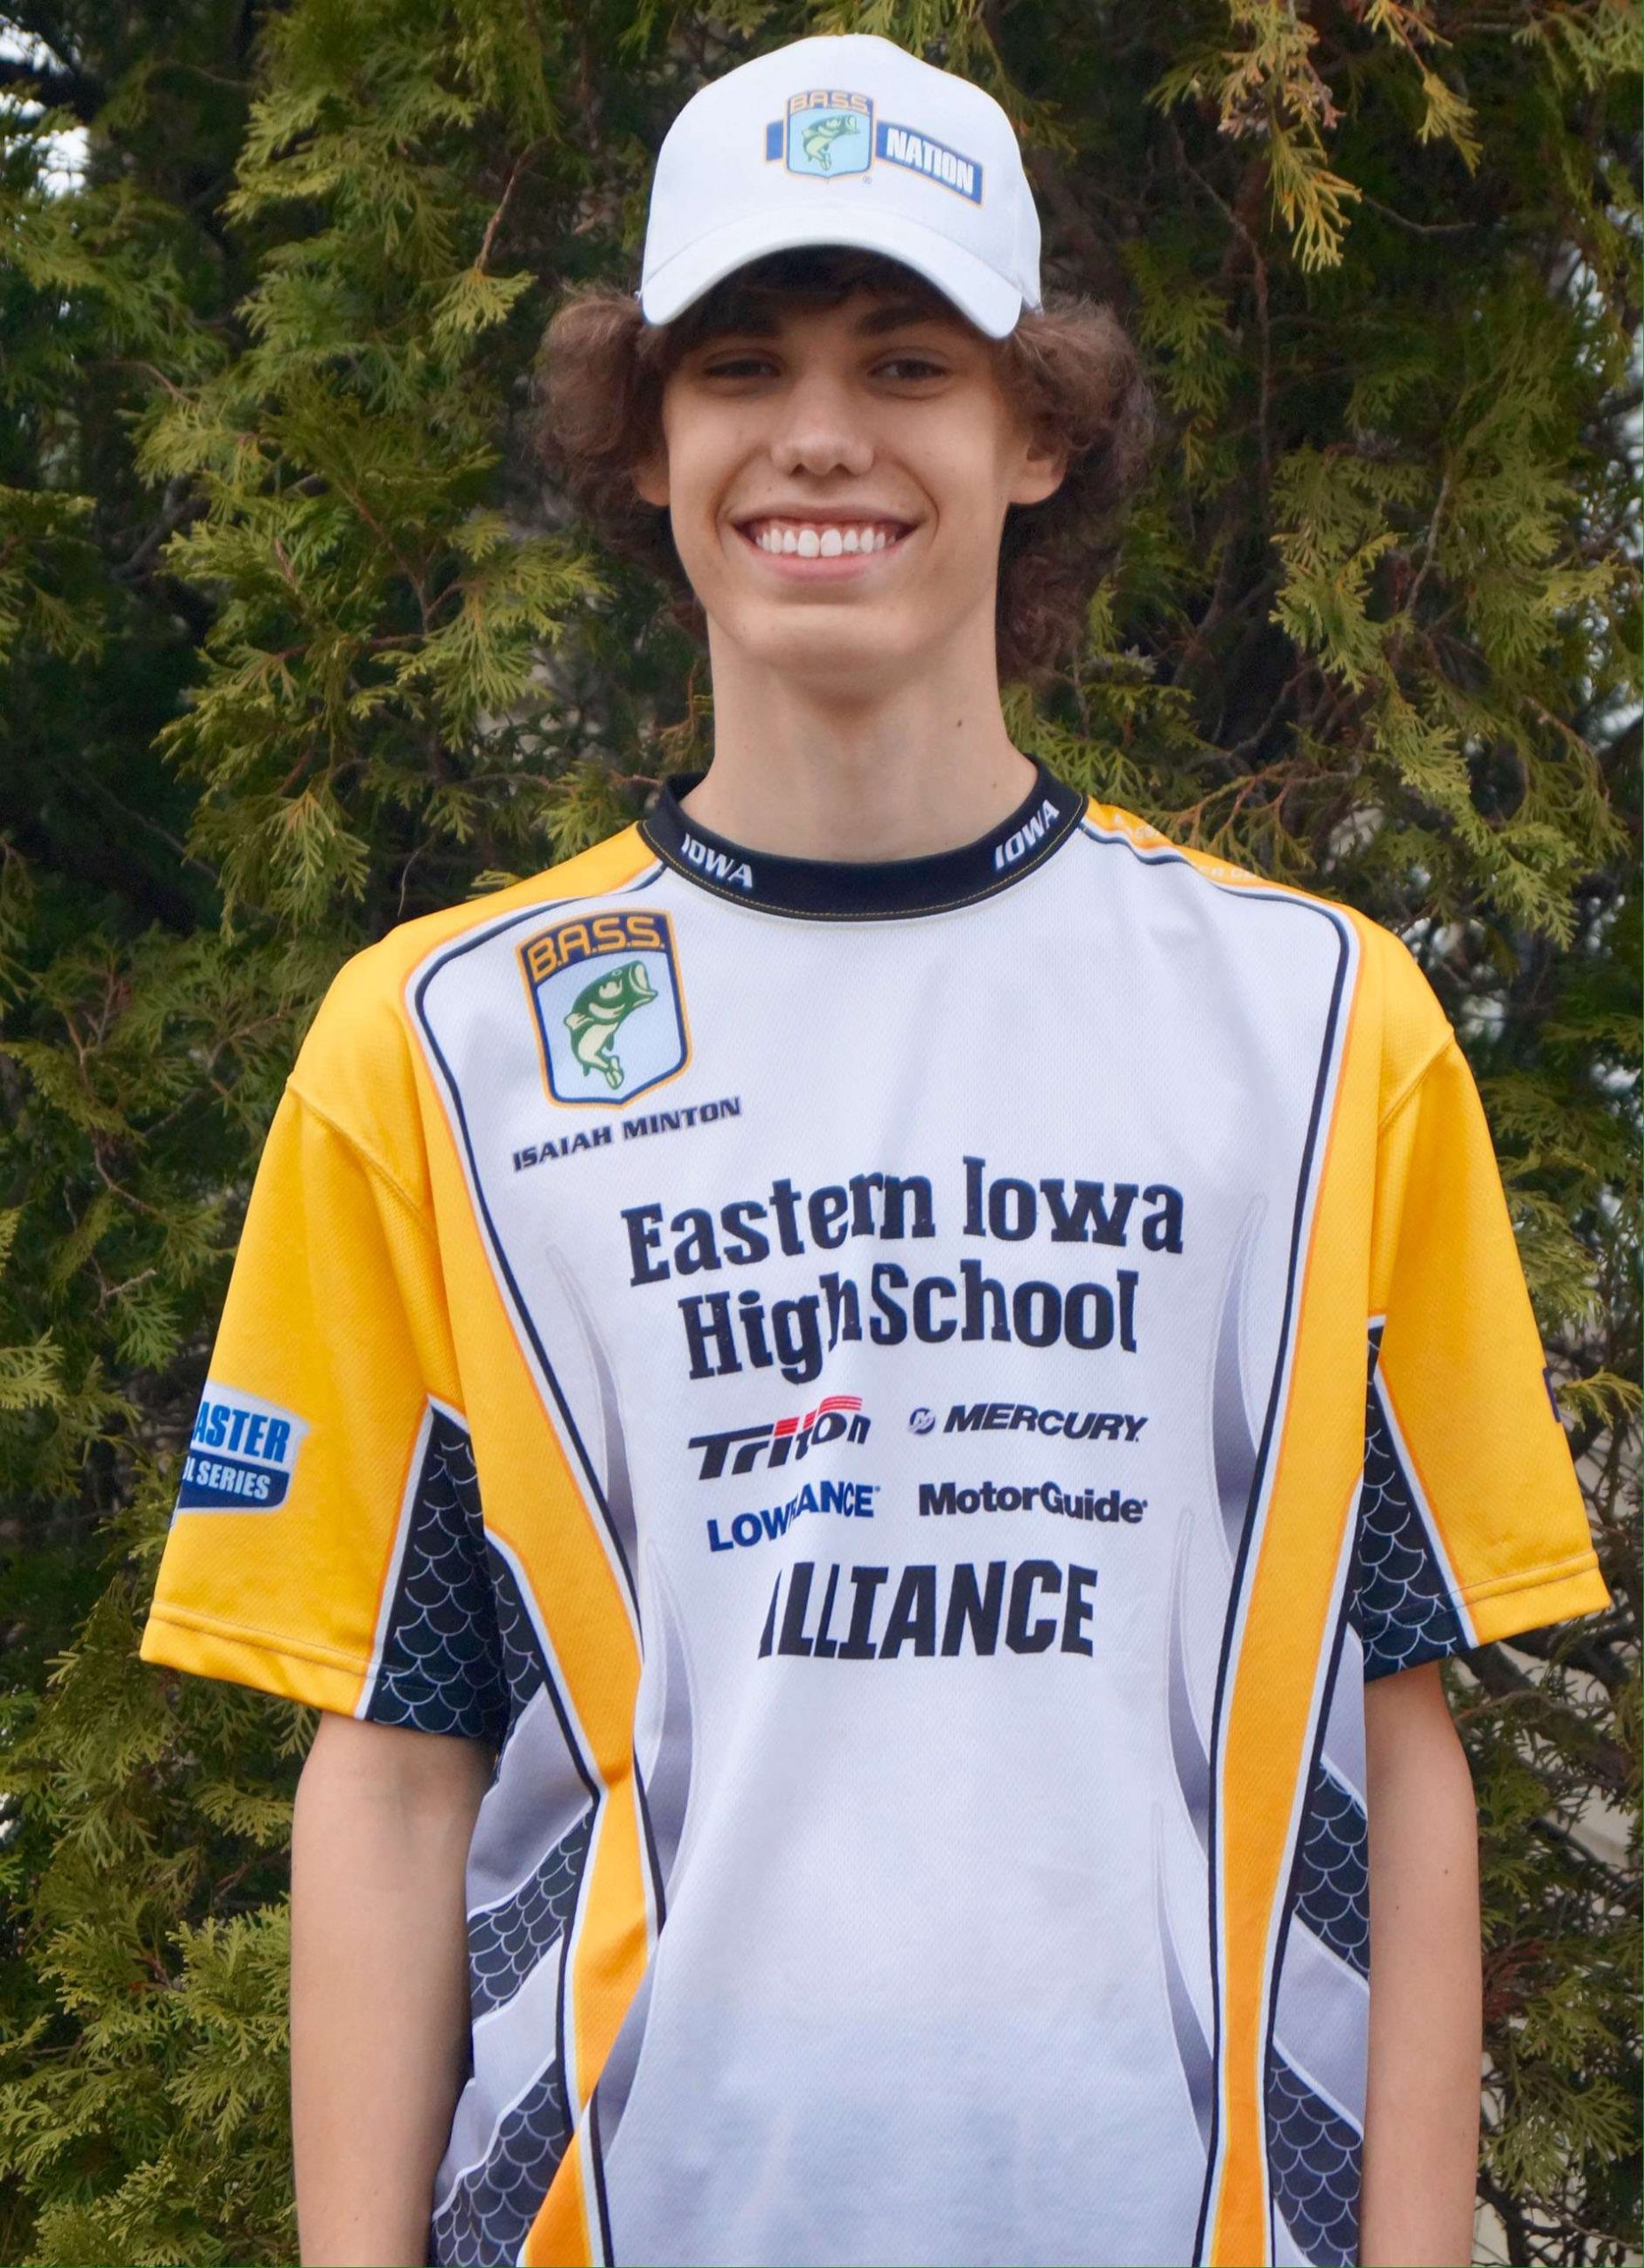 <b>Iowa: Isaiah Minton</b><br>
Minton is a sophomore from Marion, Iowa. Minton reached out to secure a sponsorship for his club and volunteered at the sports show in order get kids interested in bass fishing. He has four Top 5 finishes to his credit and earned a second-place finish in the Iowa state tournament.
